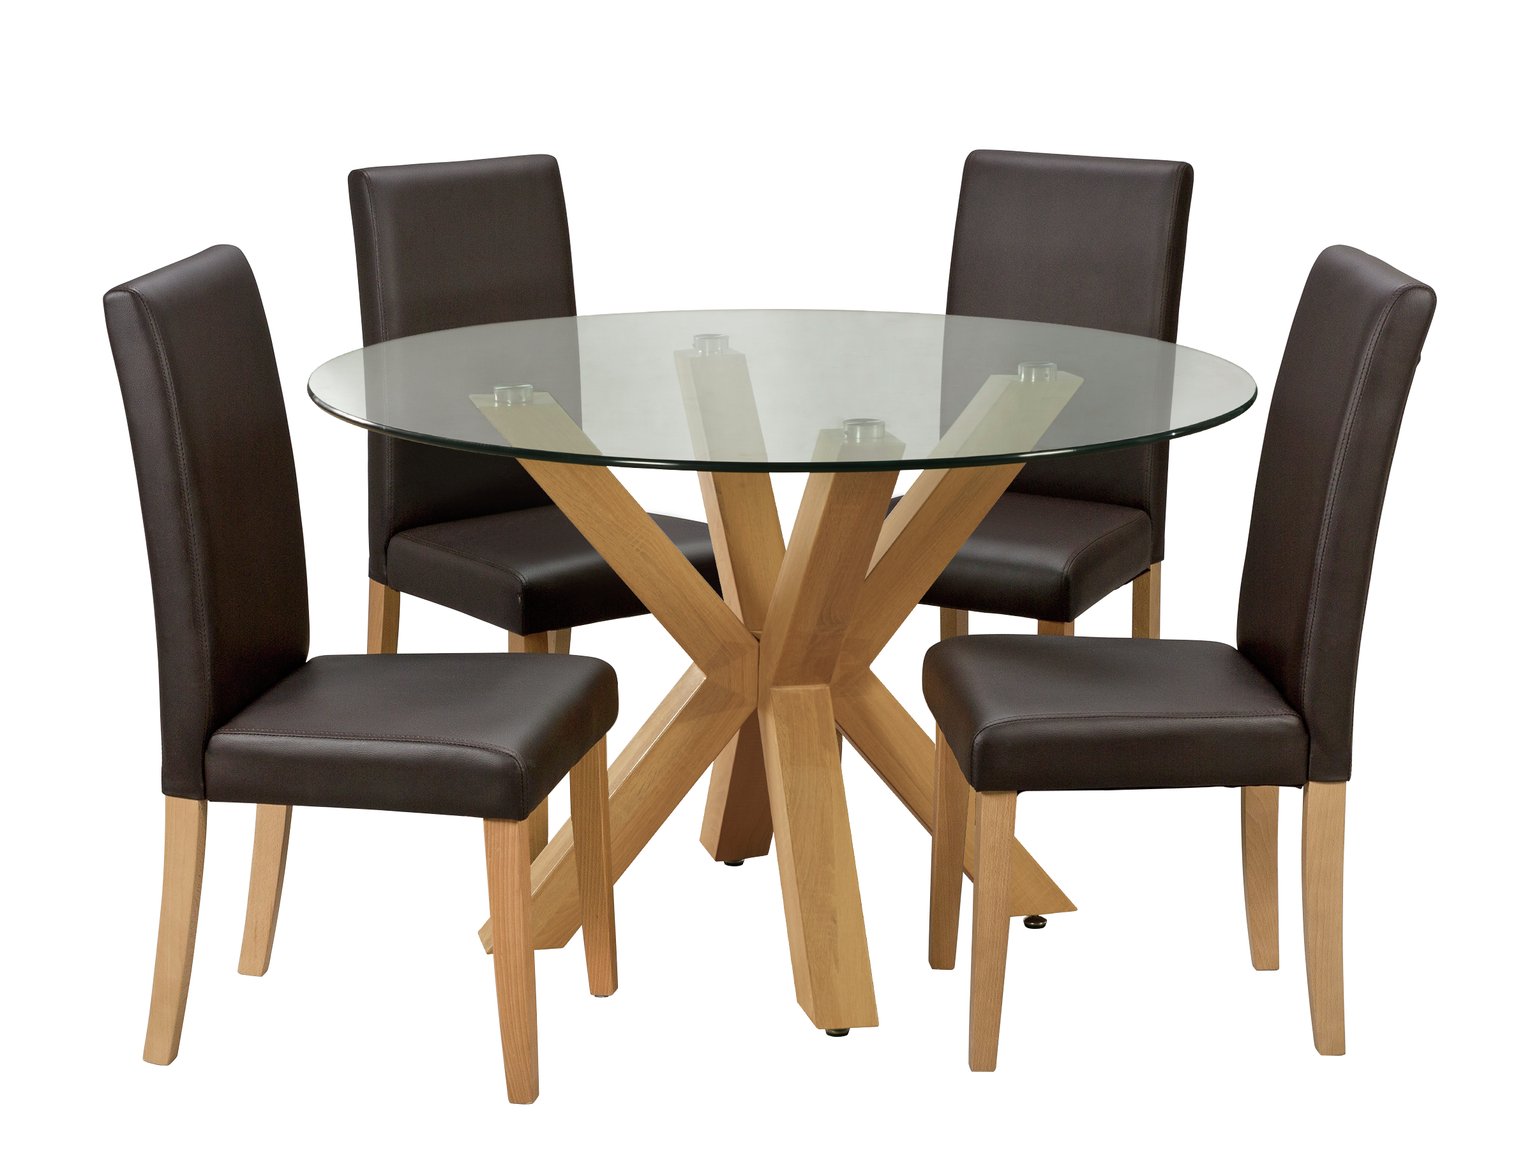 Argos Home Alden Glass Dining Table & 4 Chocolate Chairs